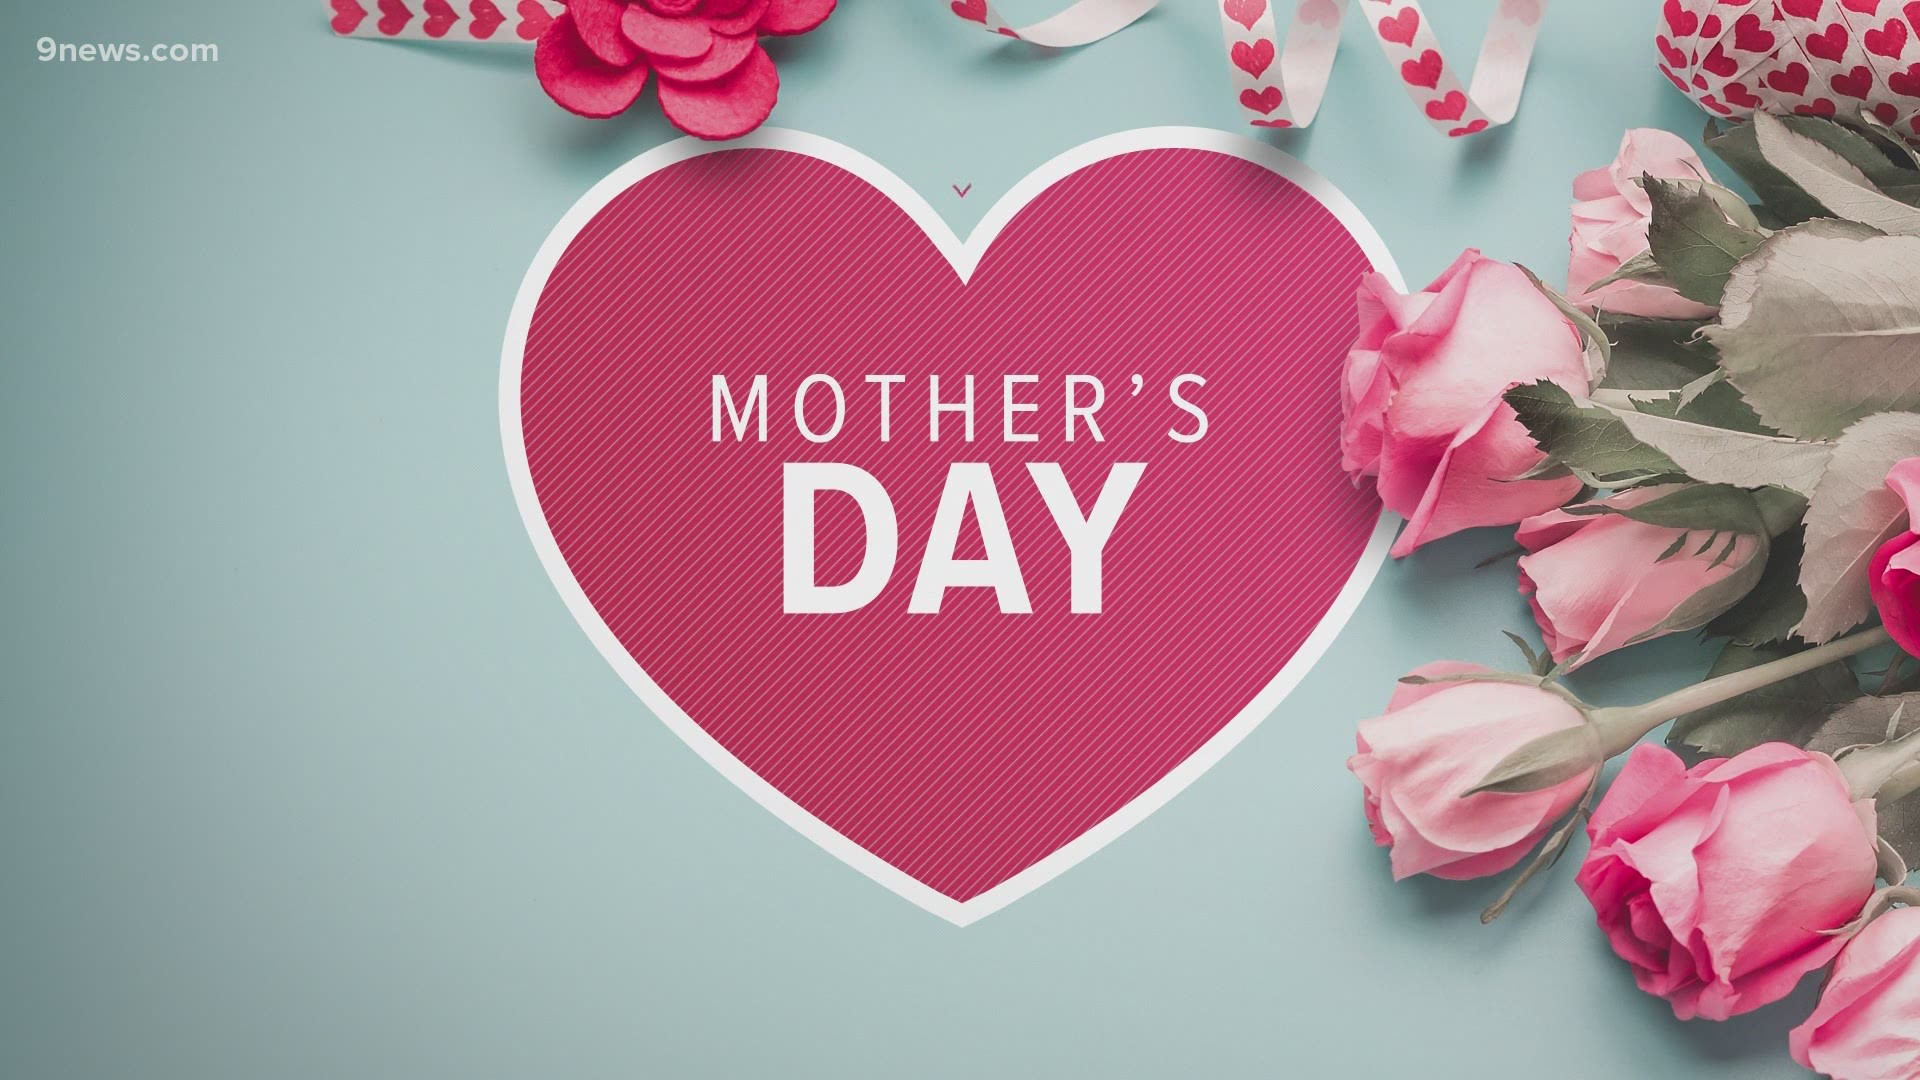 Mile High Mornings is celebrating tough moms on this Mother's Day. Share the love for a mom in your life at #milehighmornings.